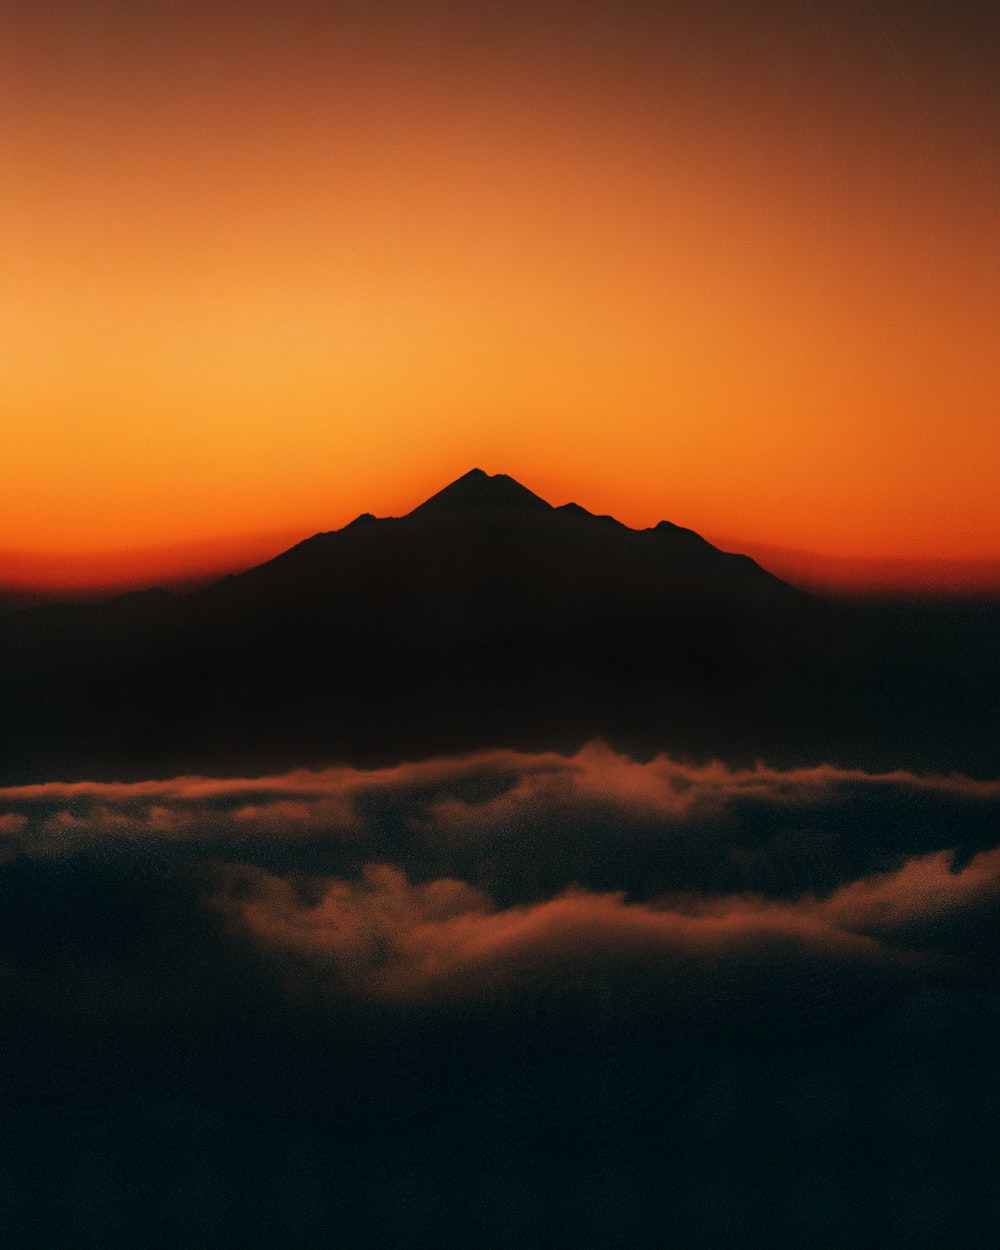 Mountain Sunset Hd 2021 Wallpapers